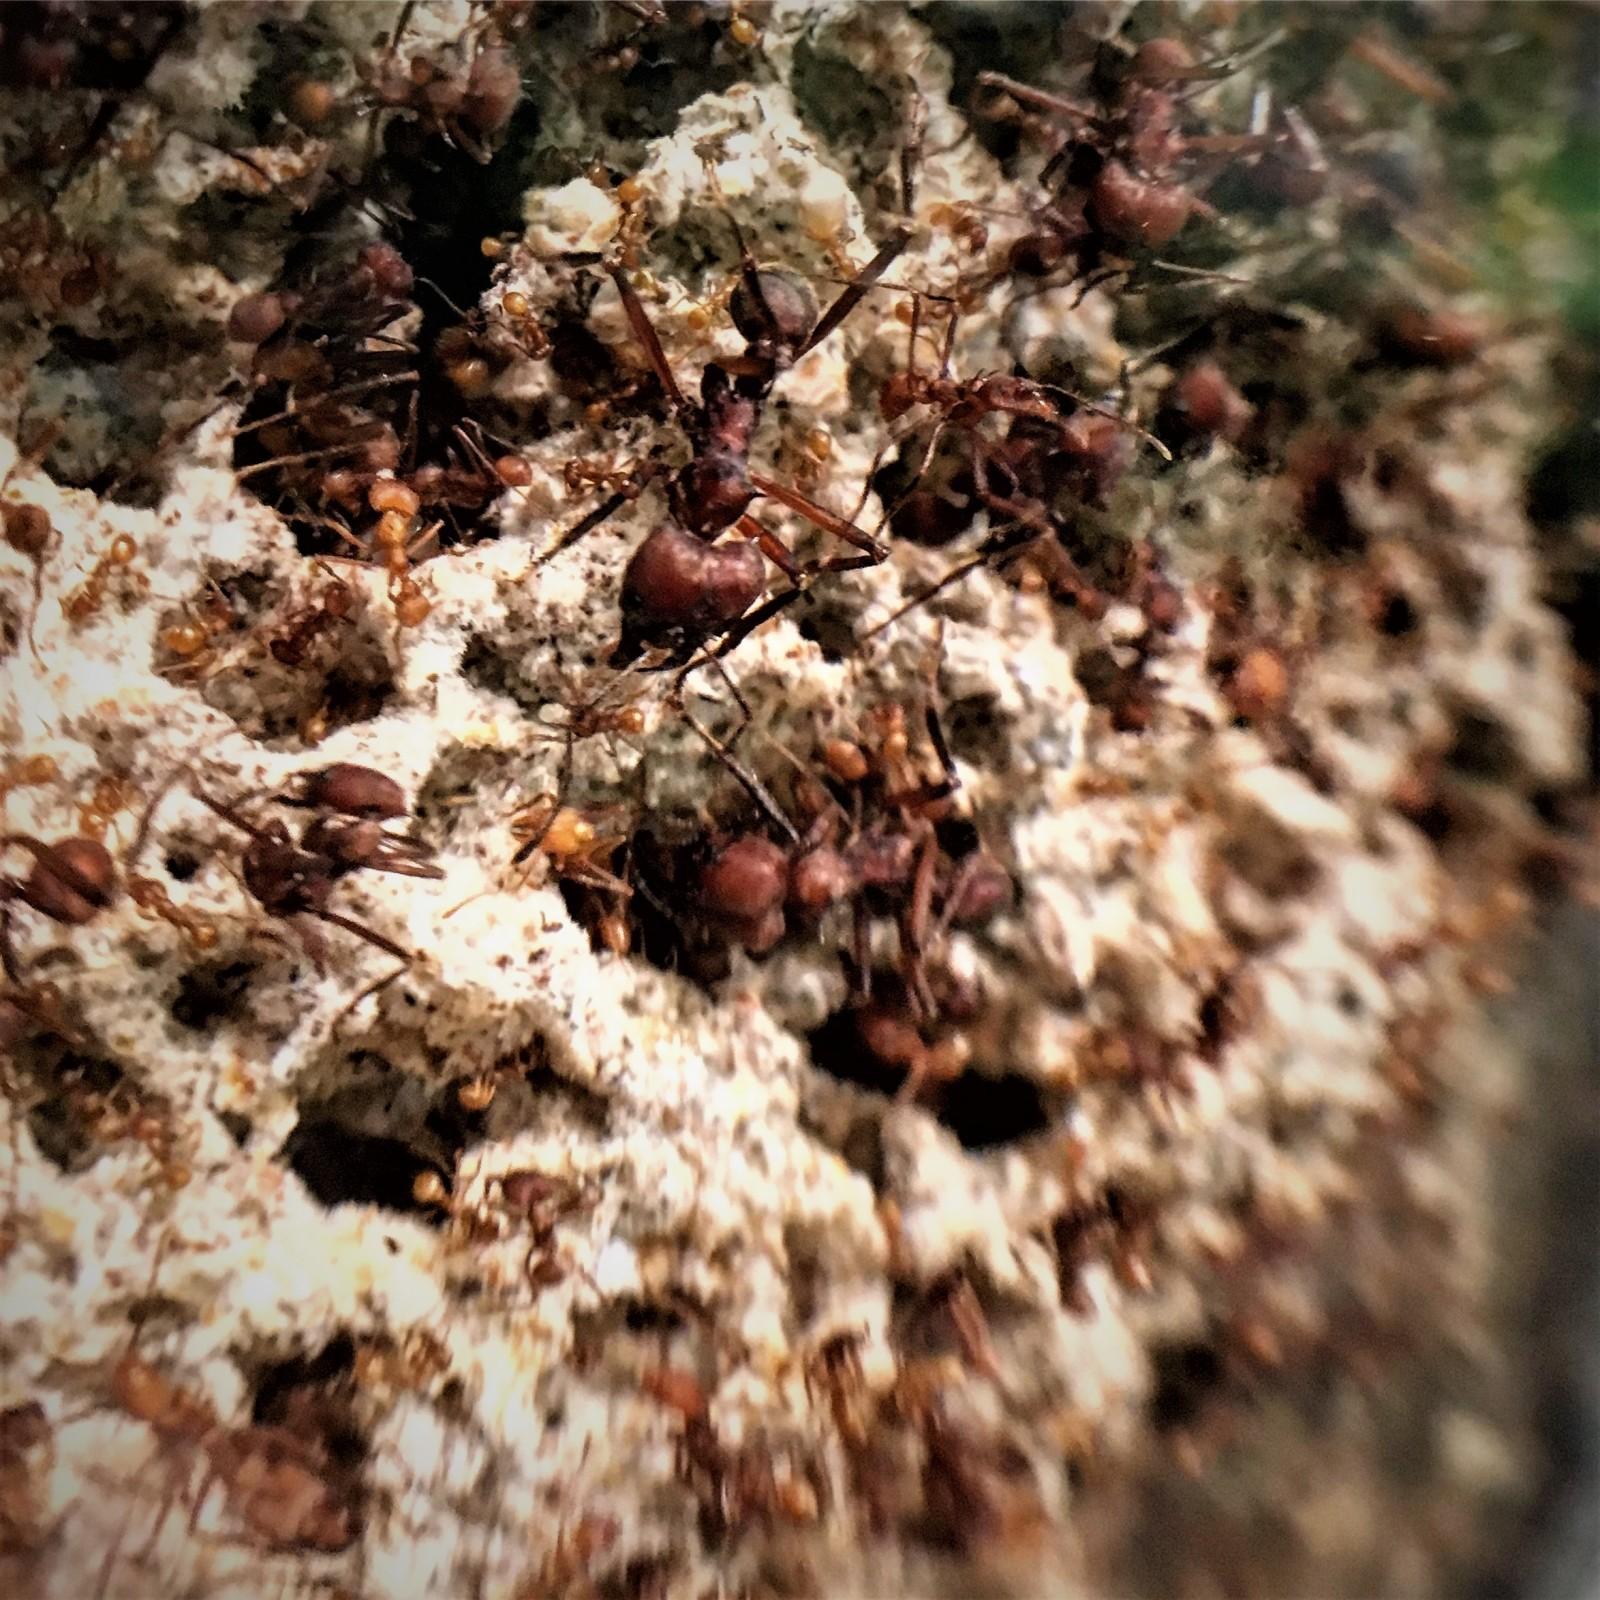 A small slice of the colony showing off the size disparity of all the different sisters in ant colonies.